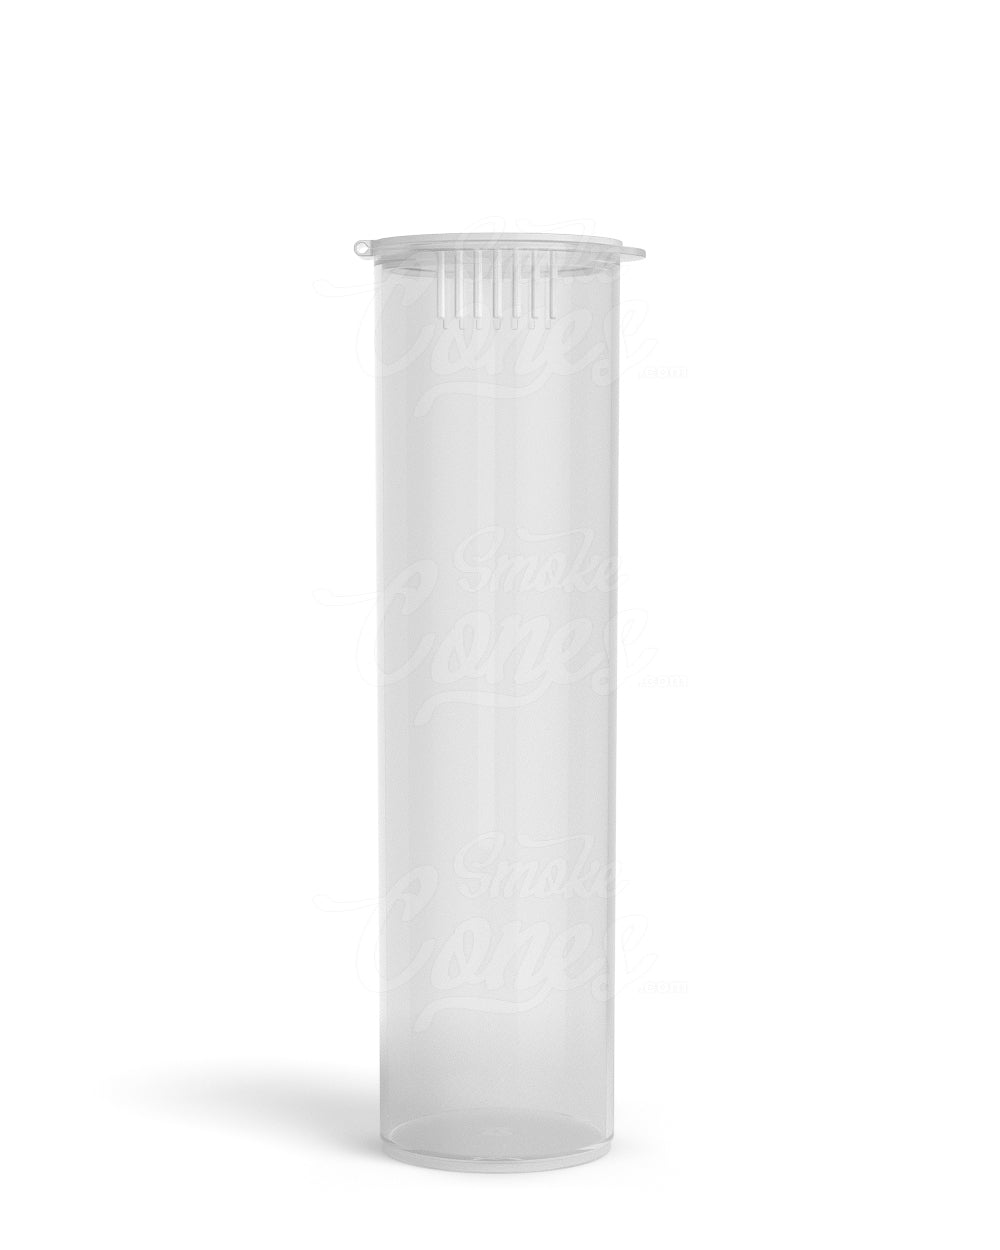 Wide Squeeze Top Child-Resistant Pre-Roll Tube